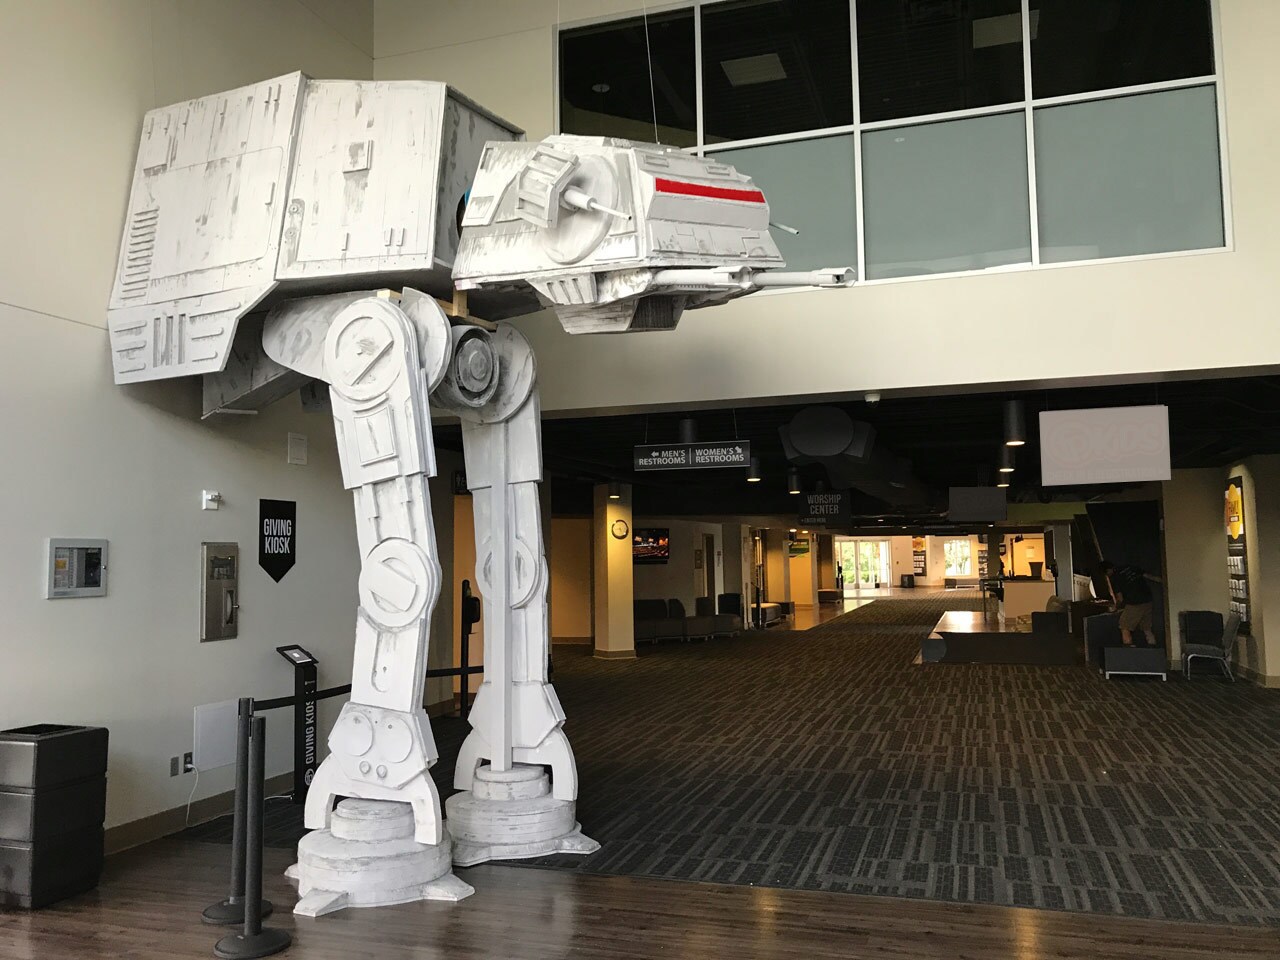 A 17-foot tall AT-AT, created by a Star Wars fan, protrudes from a wall.